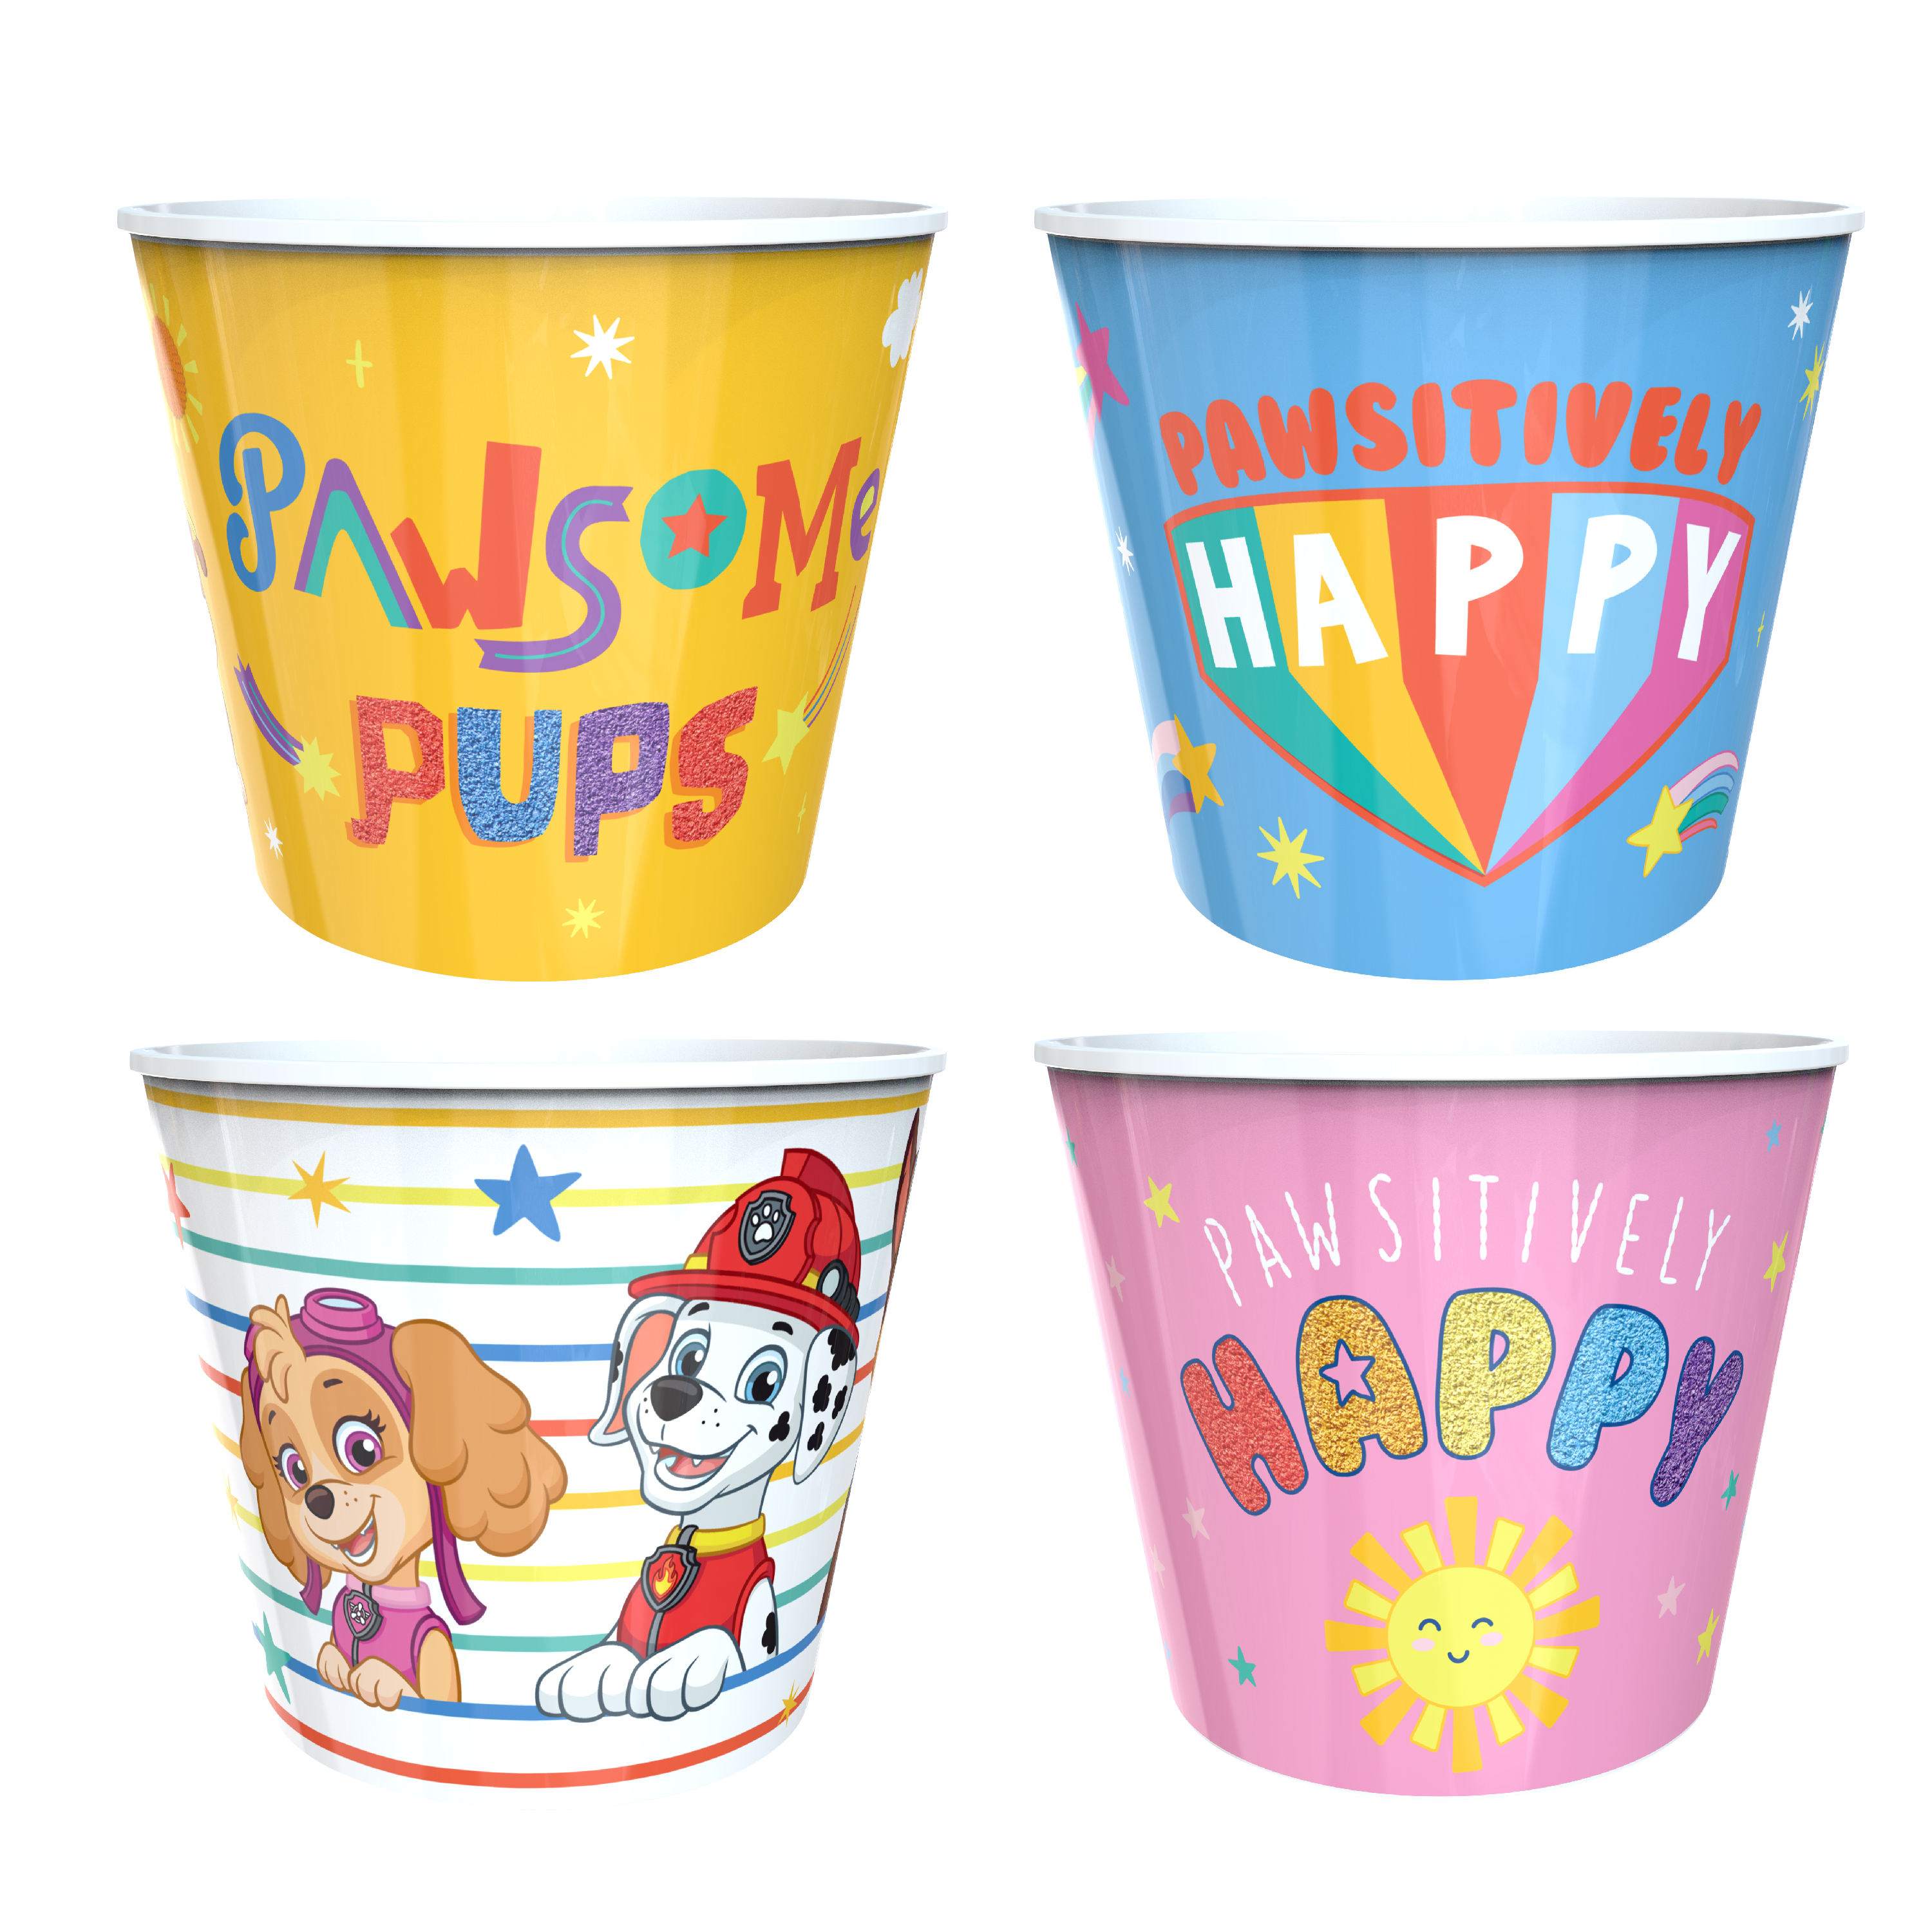 Paw Patrol Plastic Popcorn Container and Bowls, Chase, Marshall and Friends, 5-piece set slideshow image 2